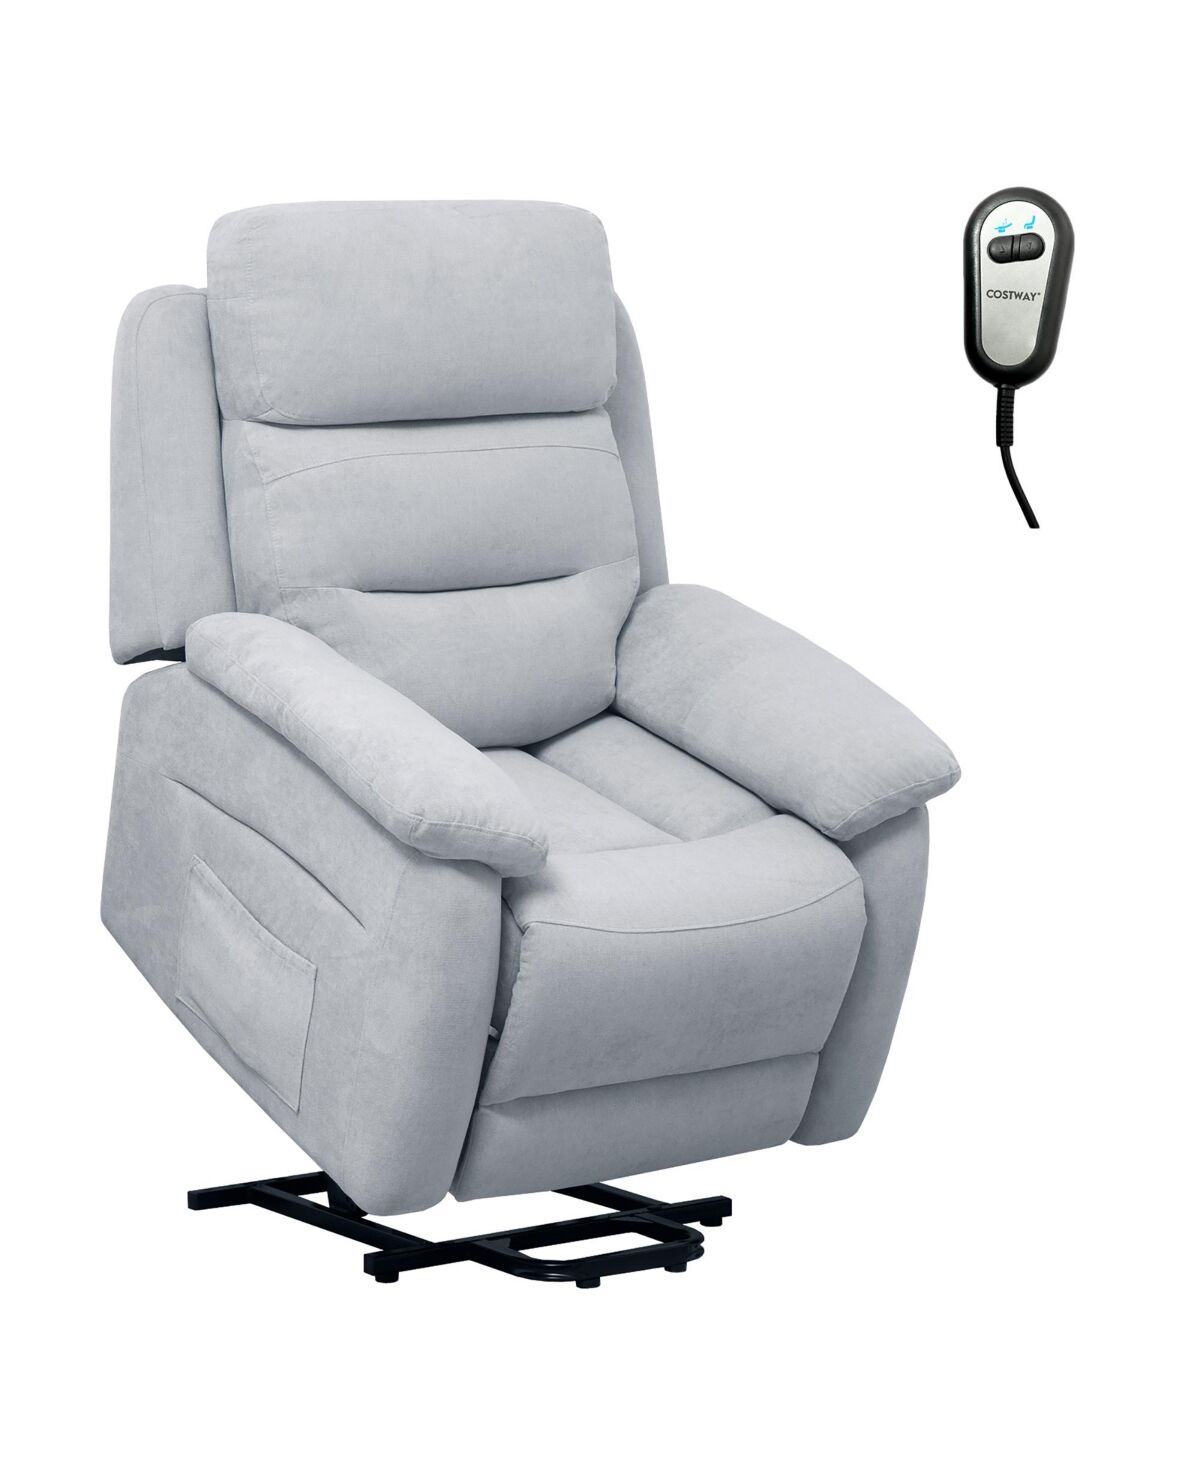 Costway Power Lift Recliner Chair Sofa for Elderly Side Pocket - Grey